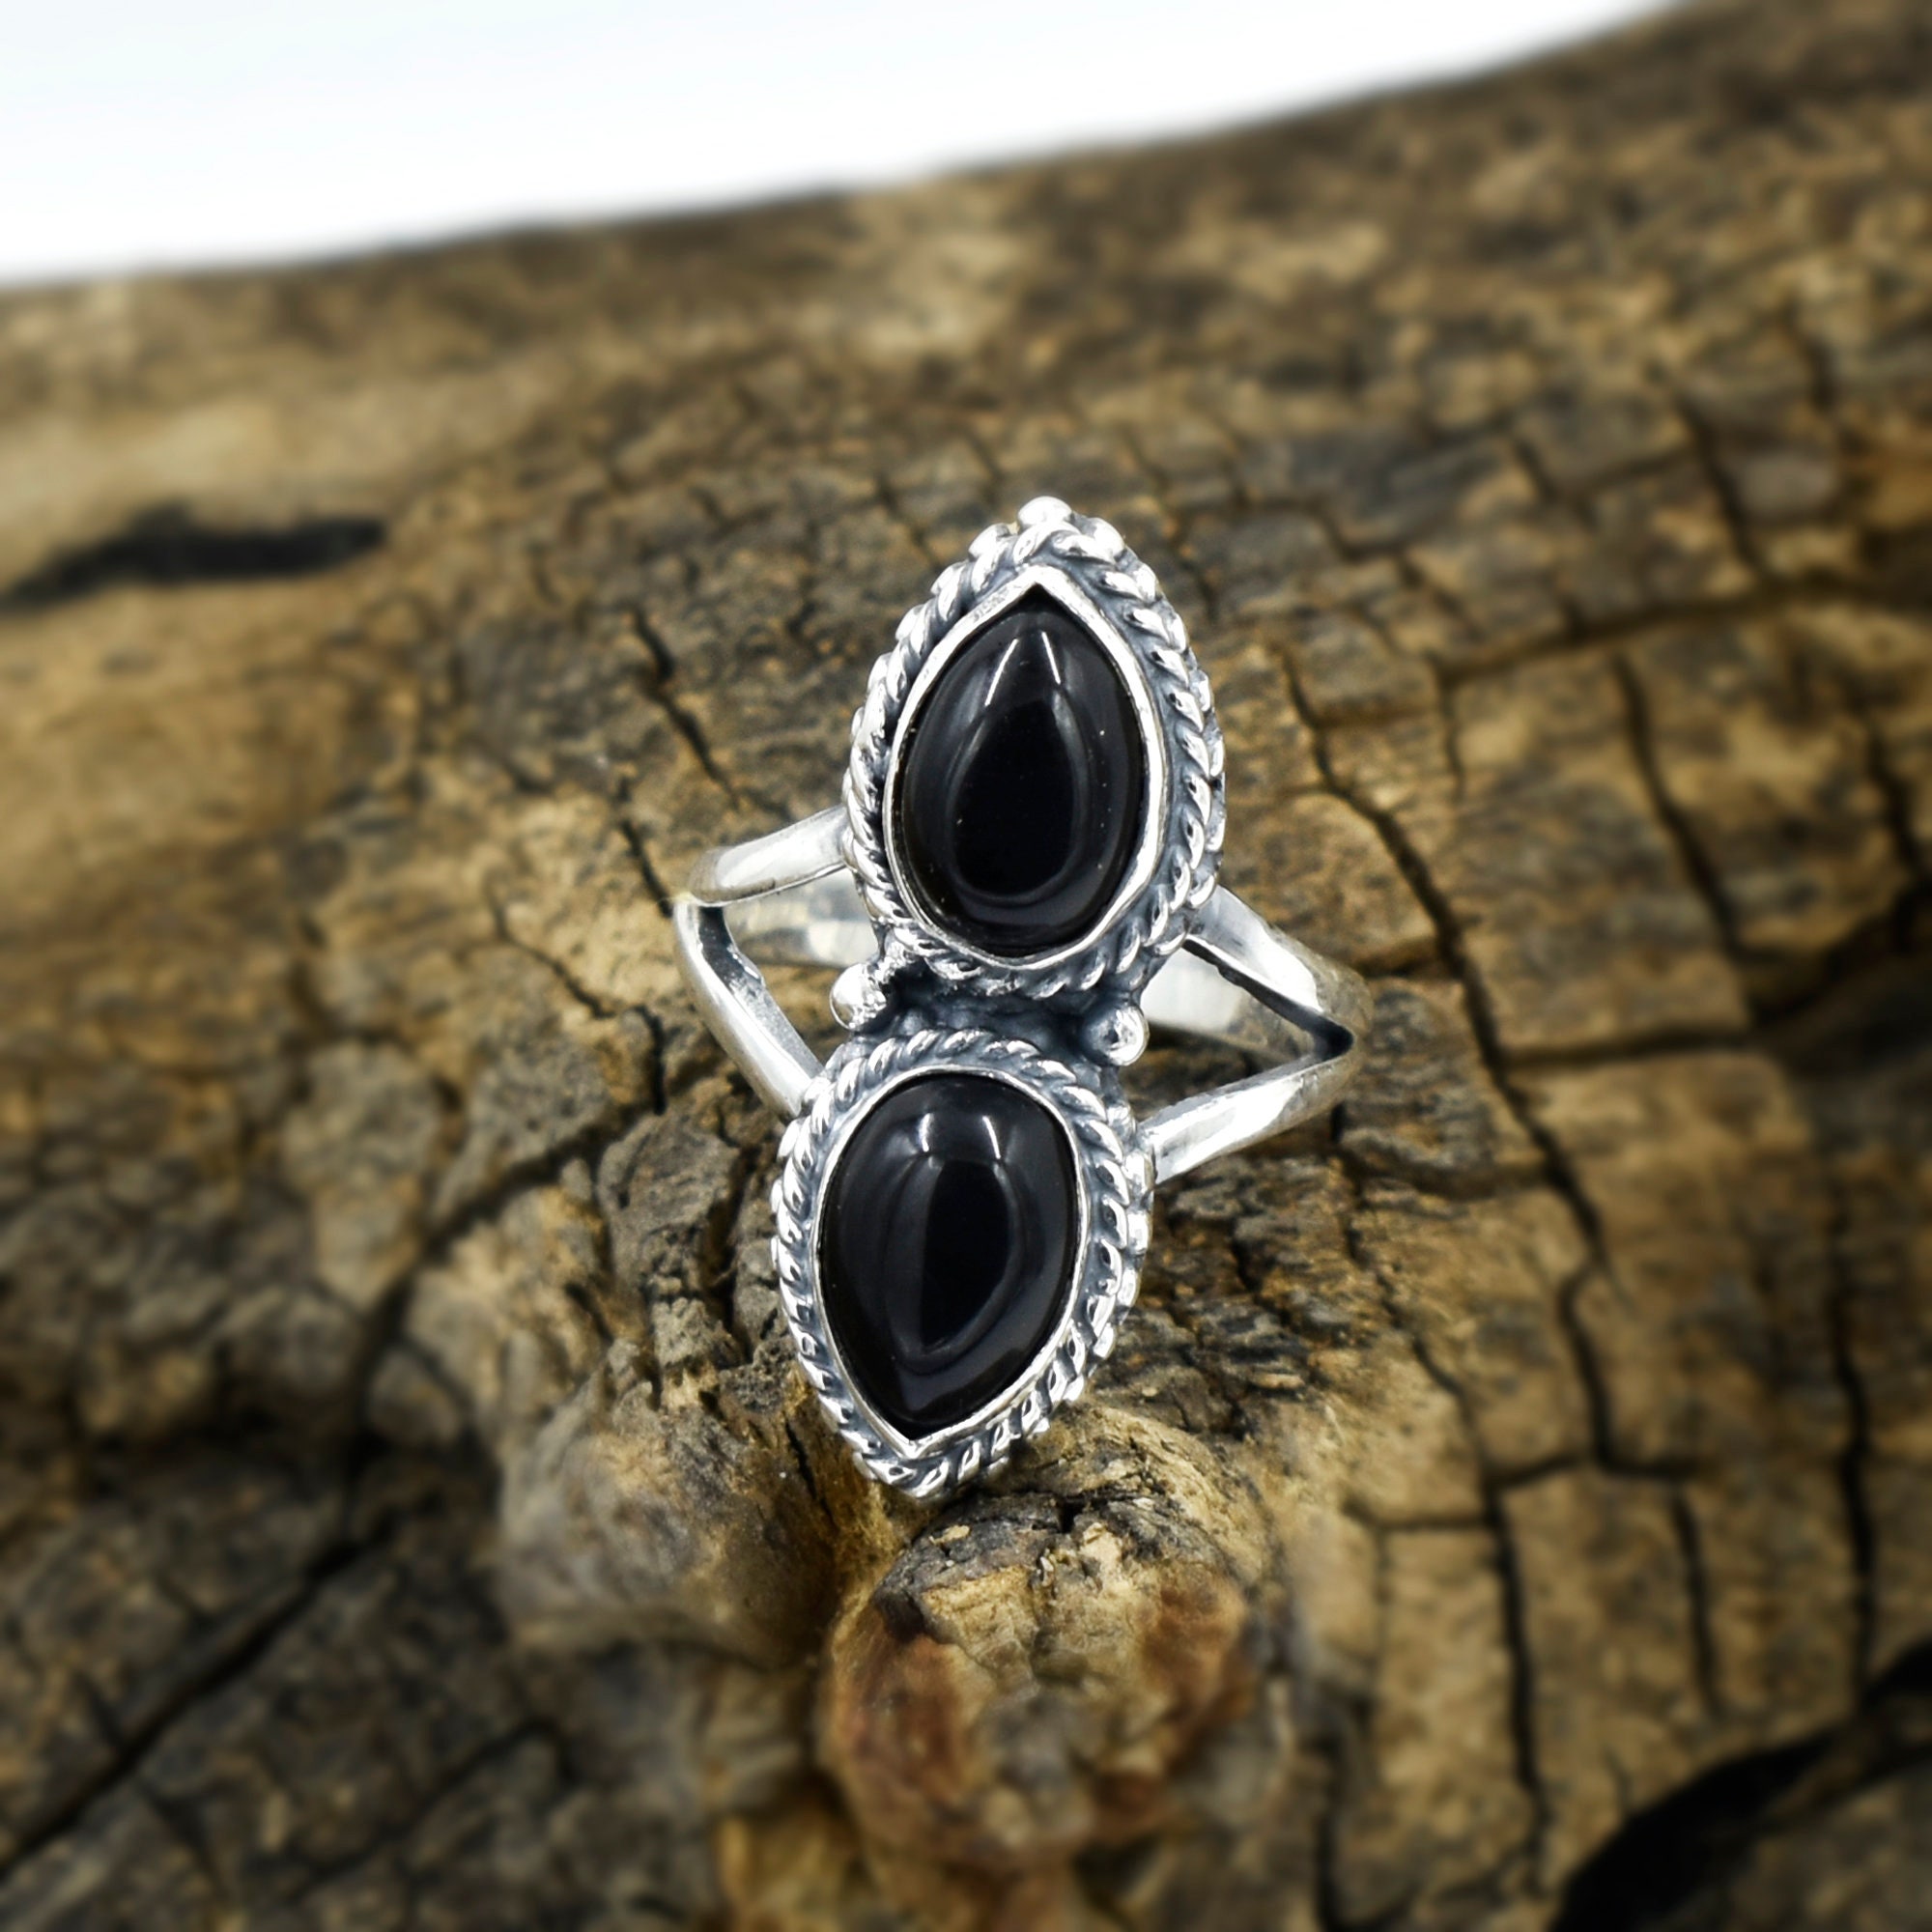 Amazon.com: Black Onyx Ring, Marquise shape Black Onyx Gemstone Sterling  Silver Ring, Women's Ring, Onyx Jewelry, Black Stone Ring, Gift For Her :  Handmade Products